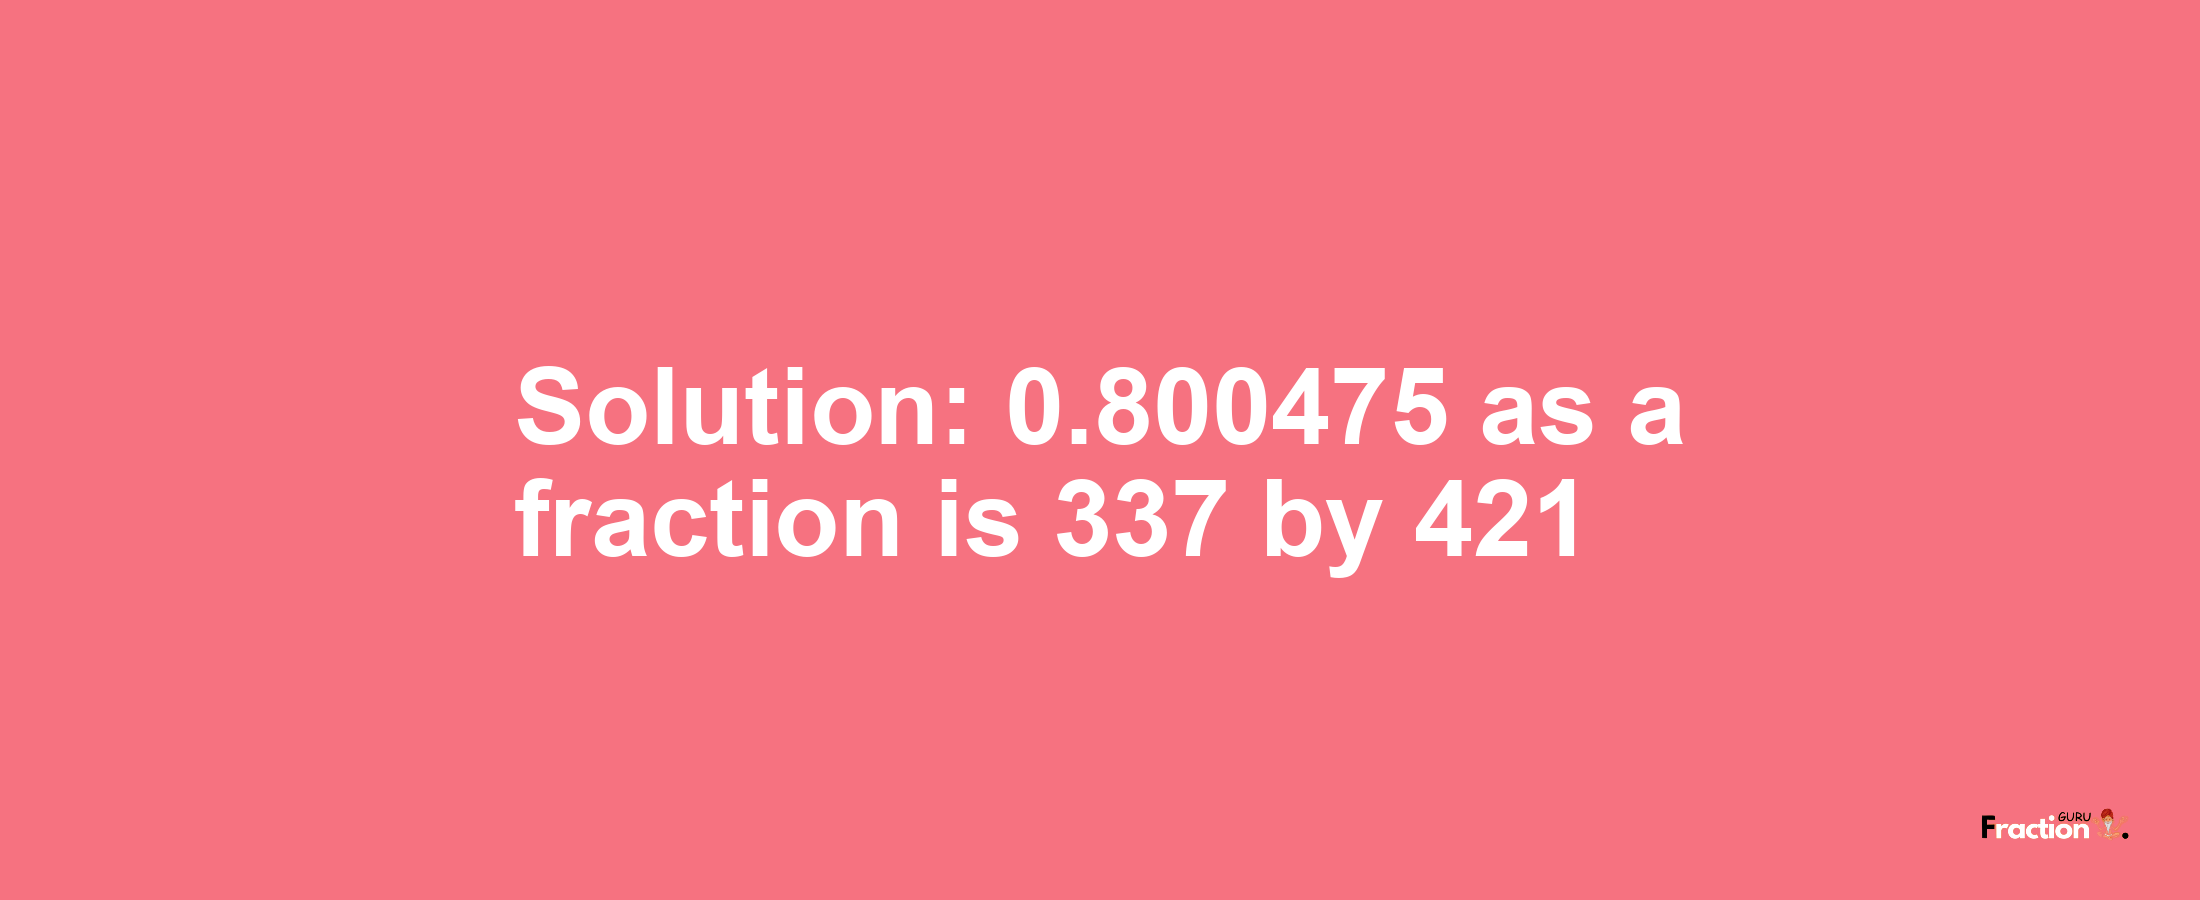 Solution:0.800475 as a fraction is 337/421